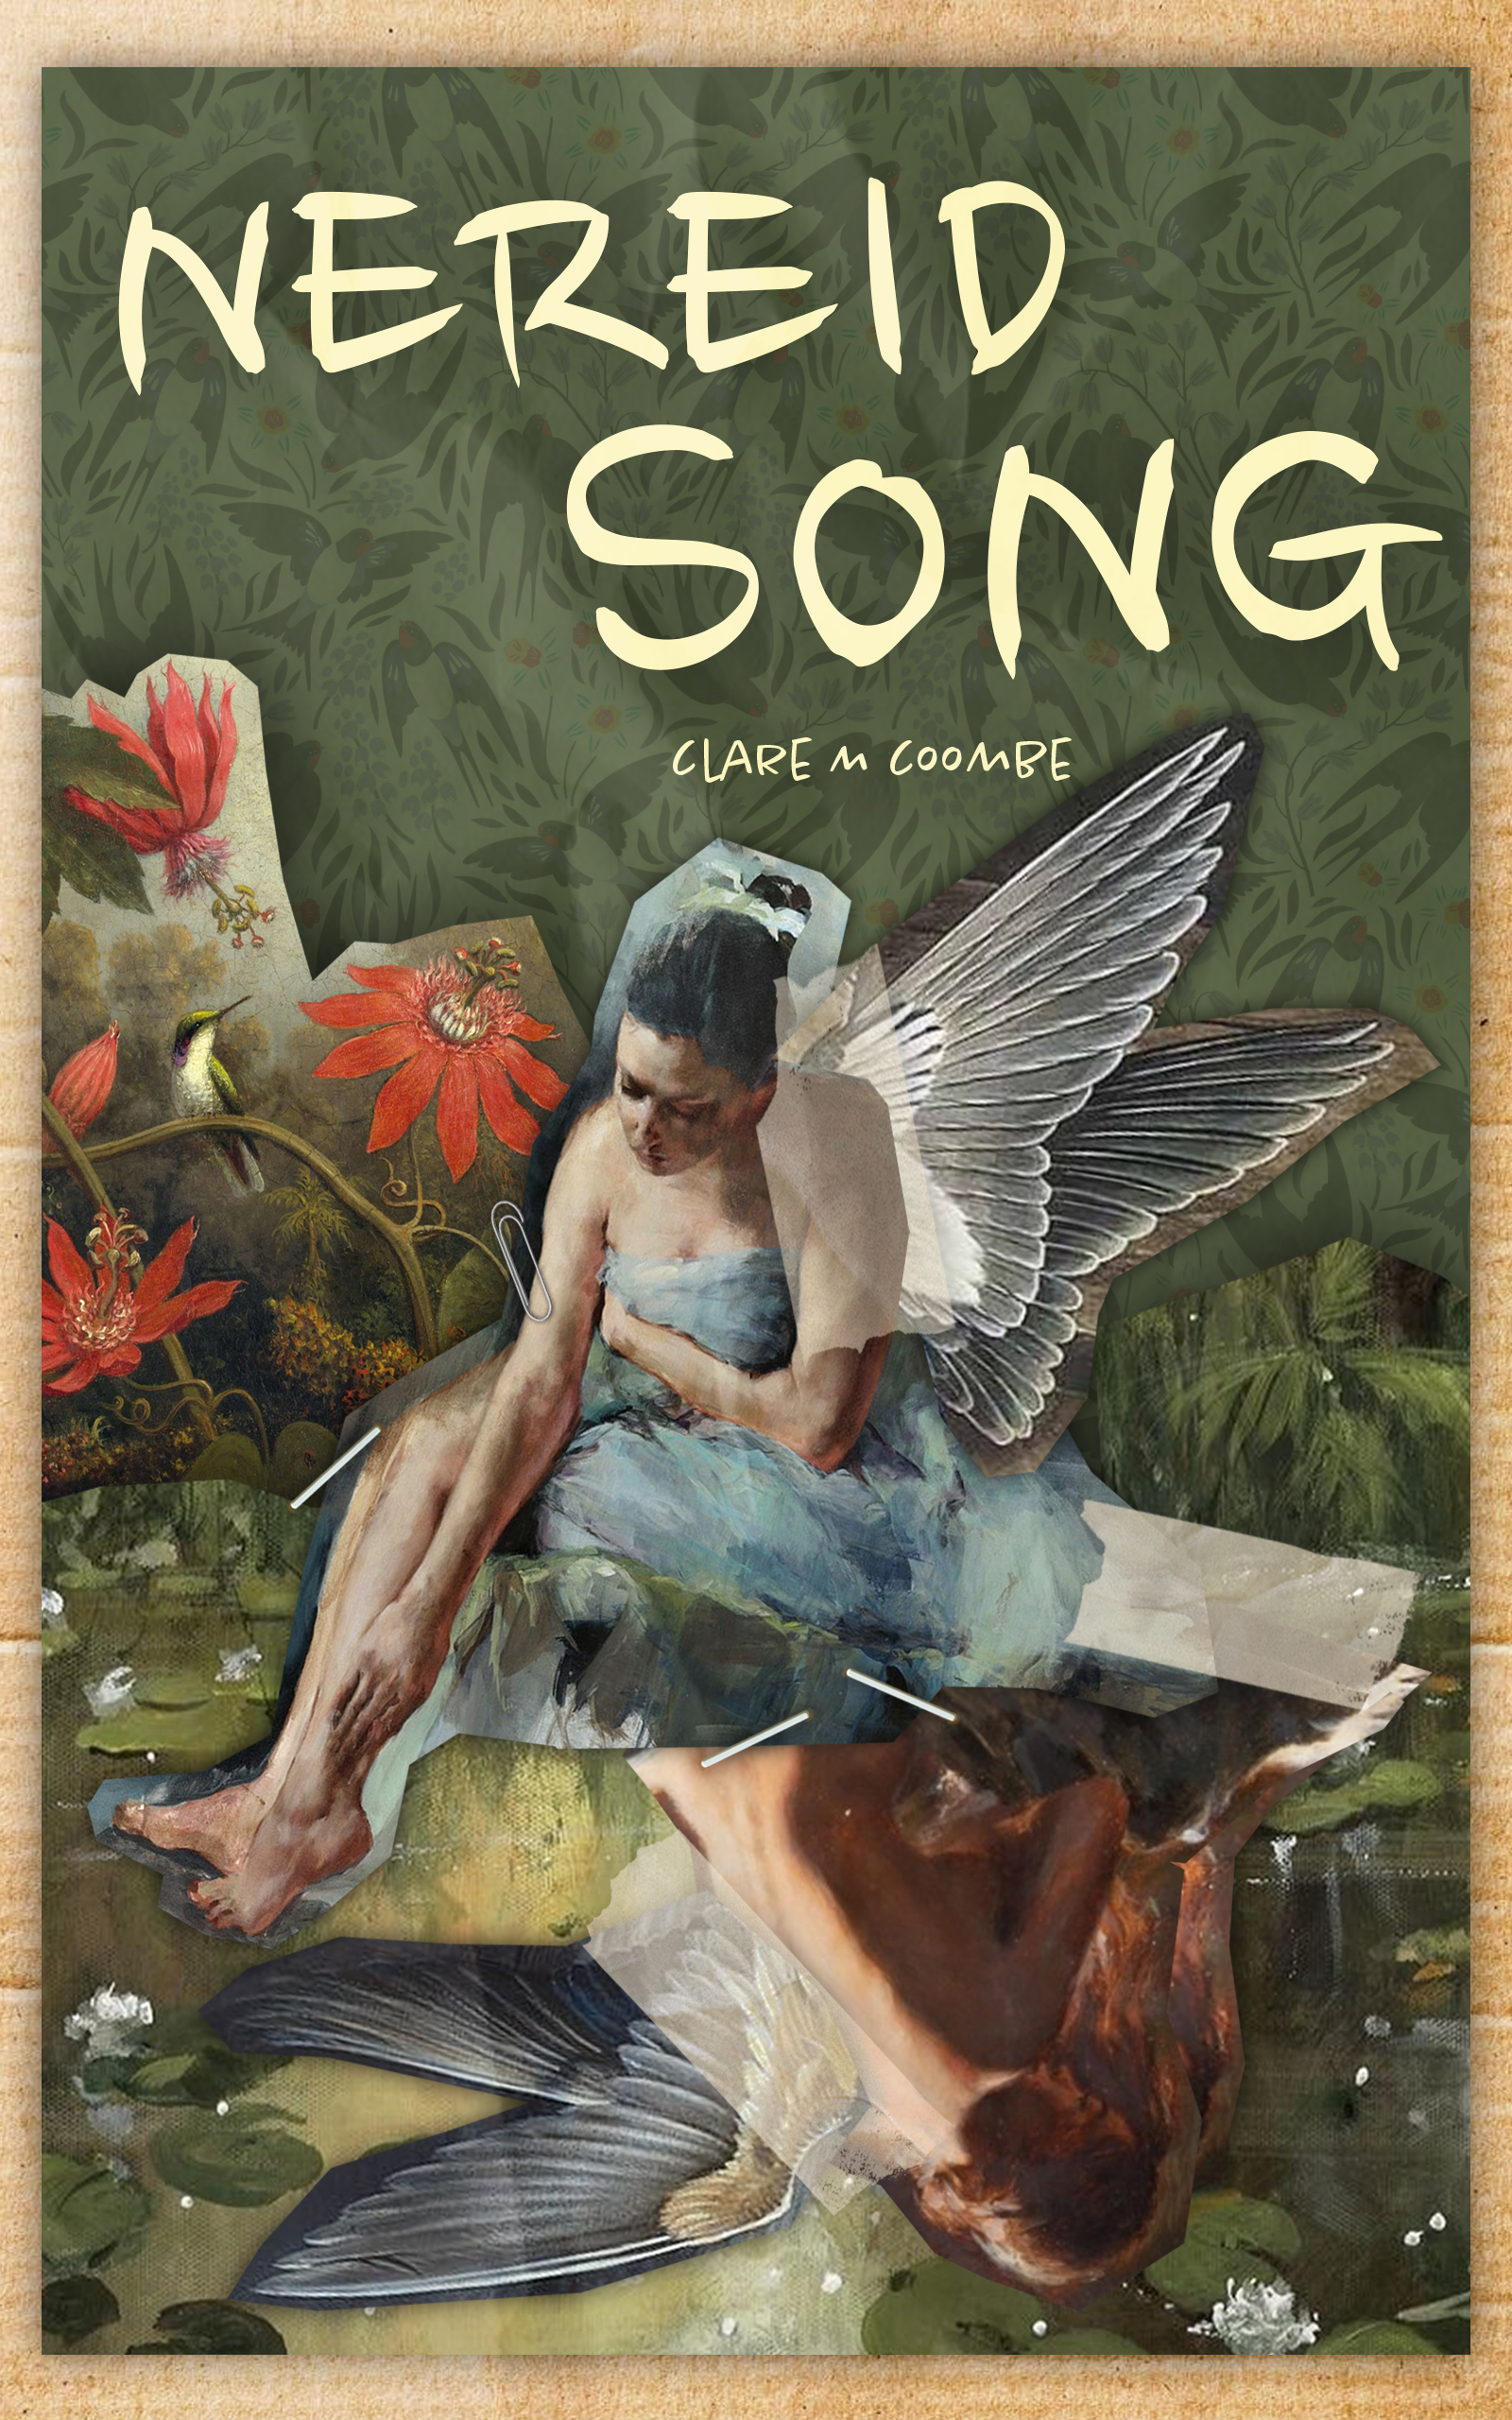 Cover Image for Nereid Song: nymph with bird wings reflected in pool by sister image